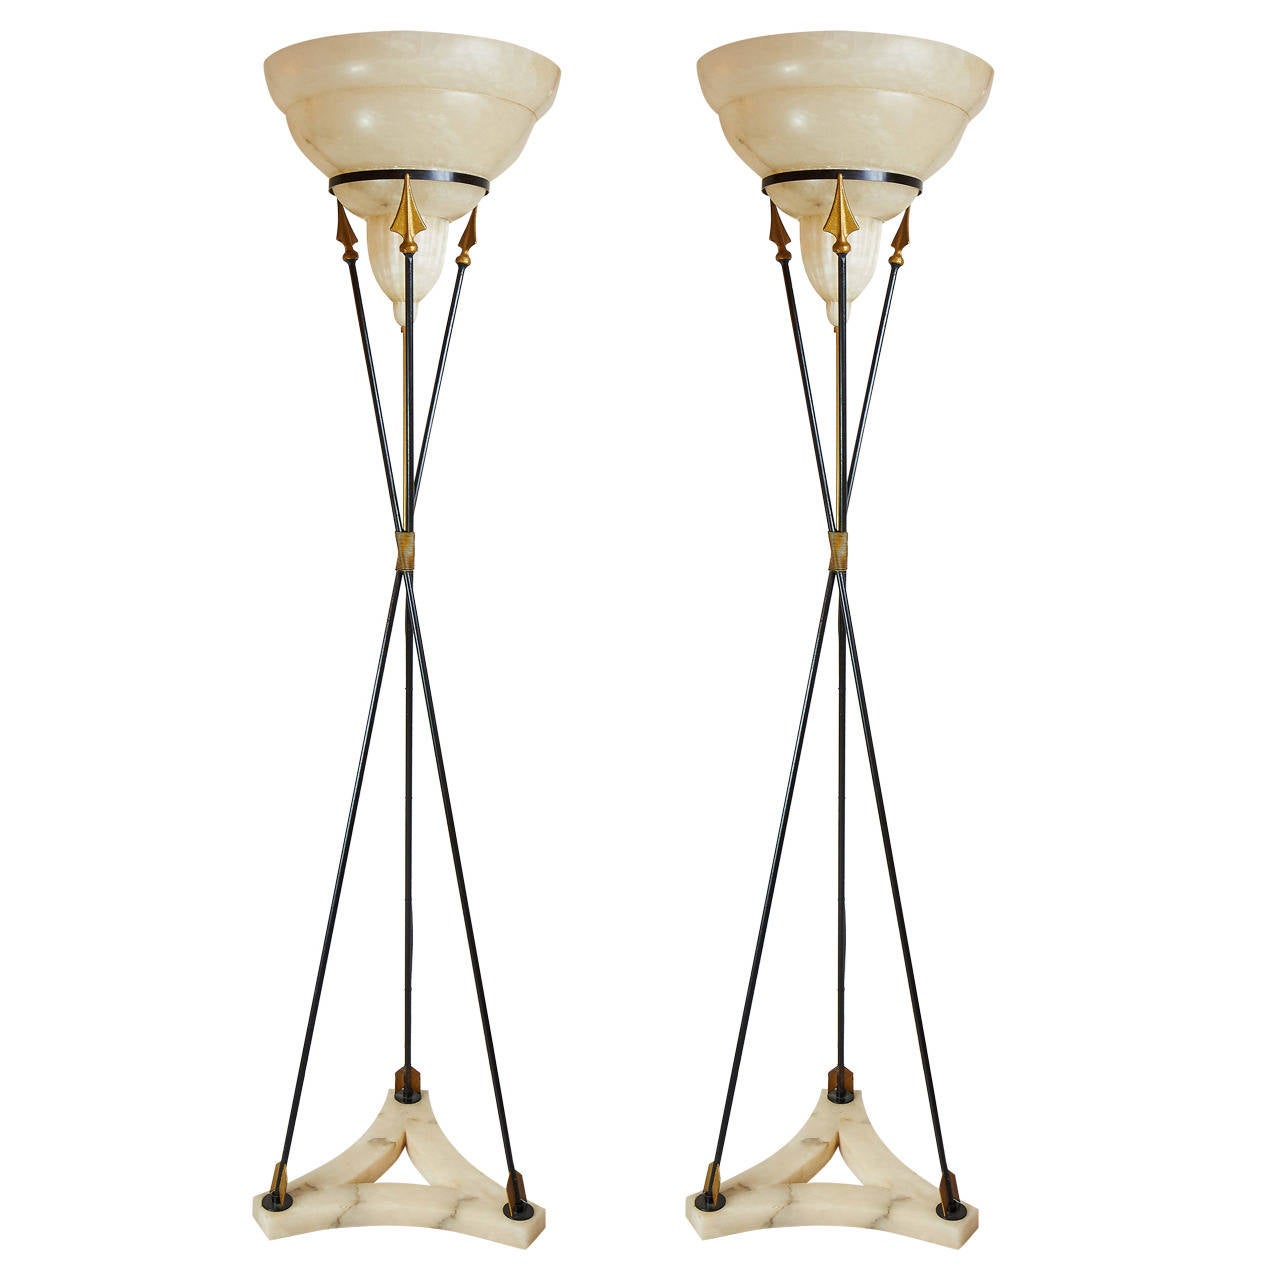 Important Pair of Italian 1940s Gold Handmade Iron and Alabaster Floor Lamps